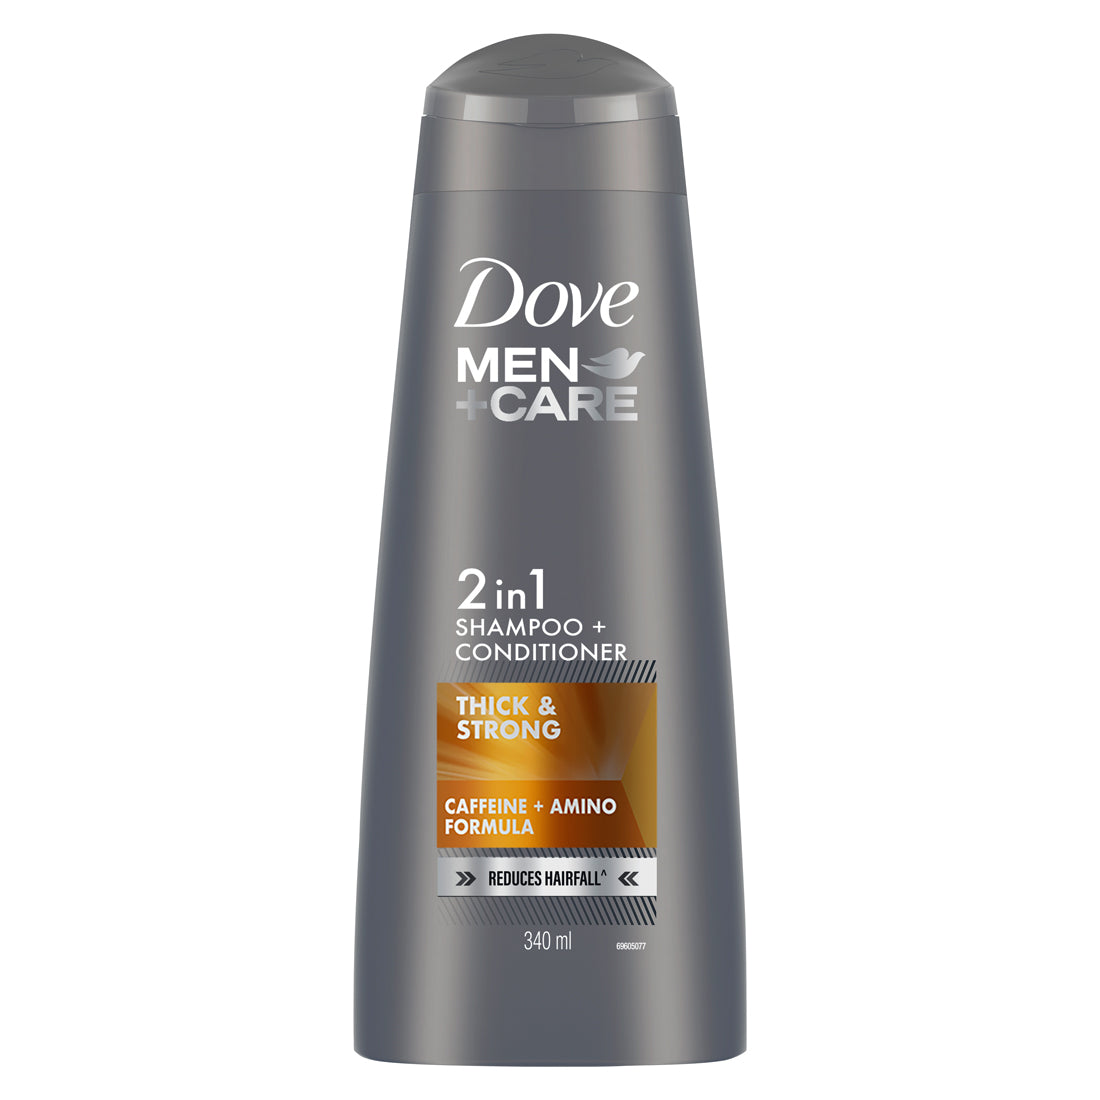 Dove Men+Care Thick & Strong 2in1 Shampoo+Conditioner Combo, 340ml (Pack of 3)